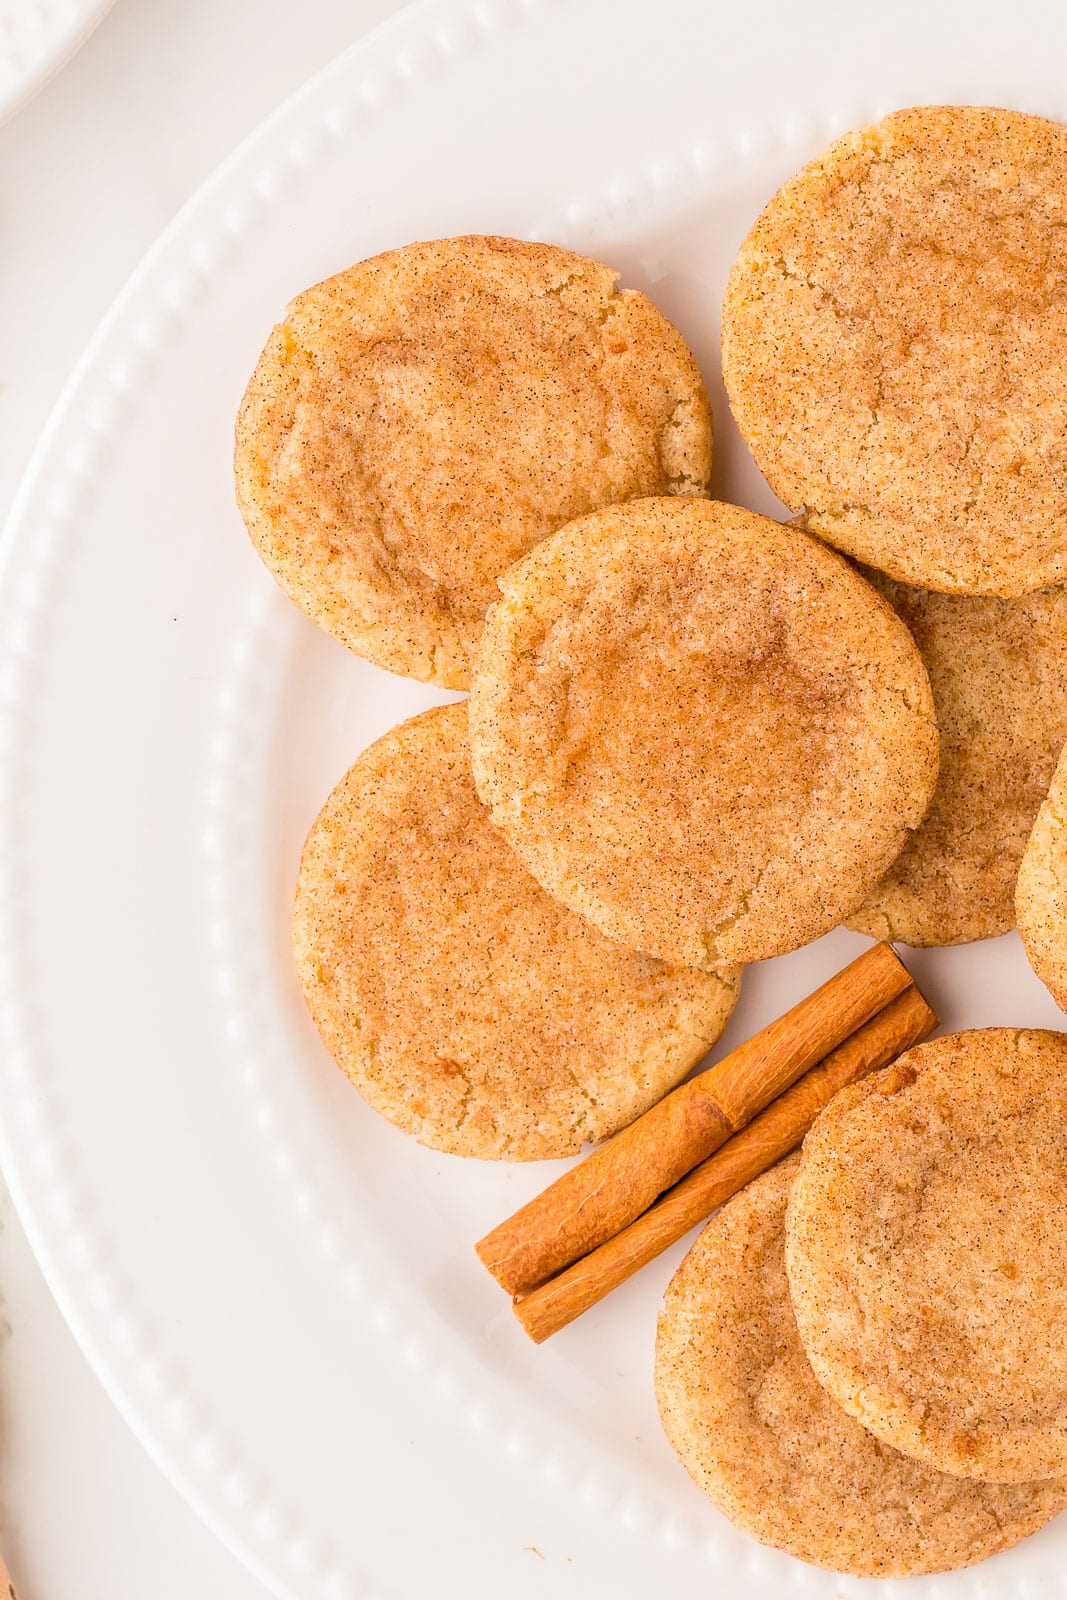 Plate of classic snickerdoodles and a cinnamon stick.